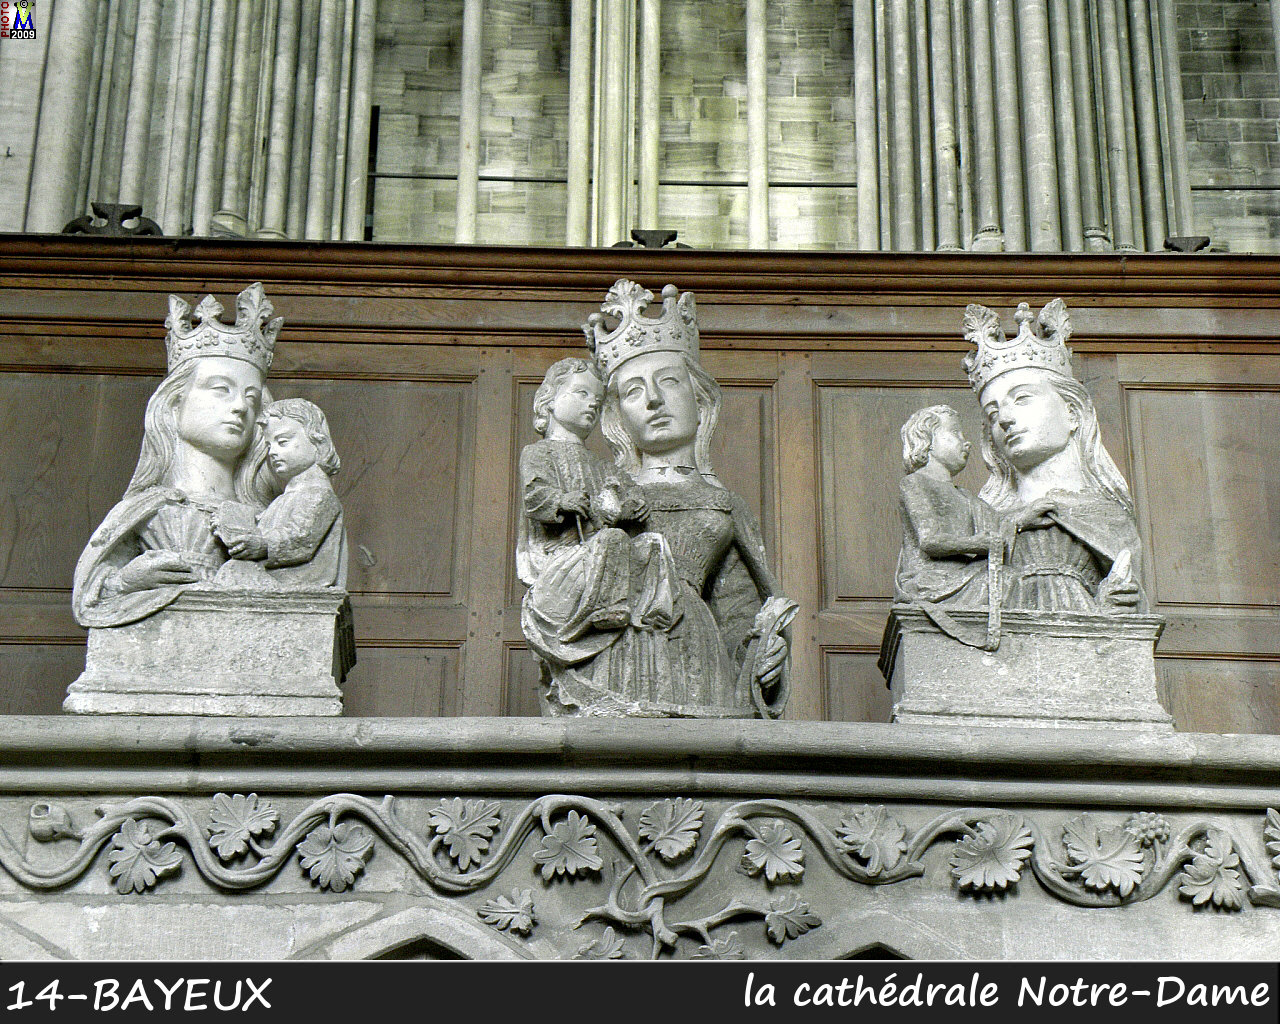 14BAYEUX_cathedrale_222.jpg